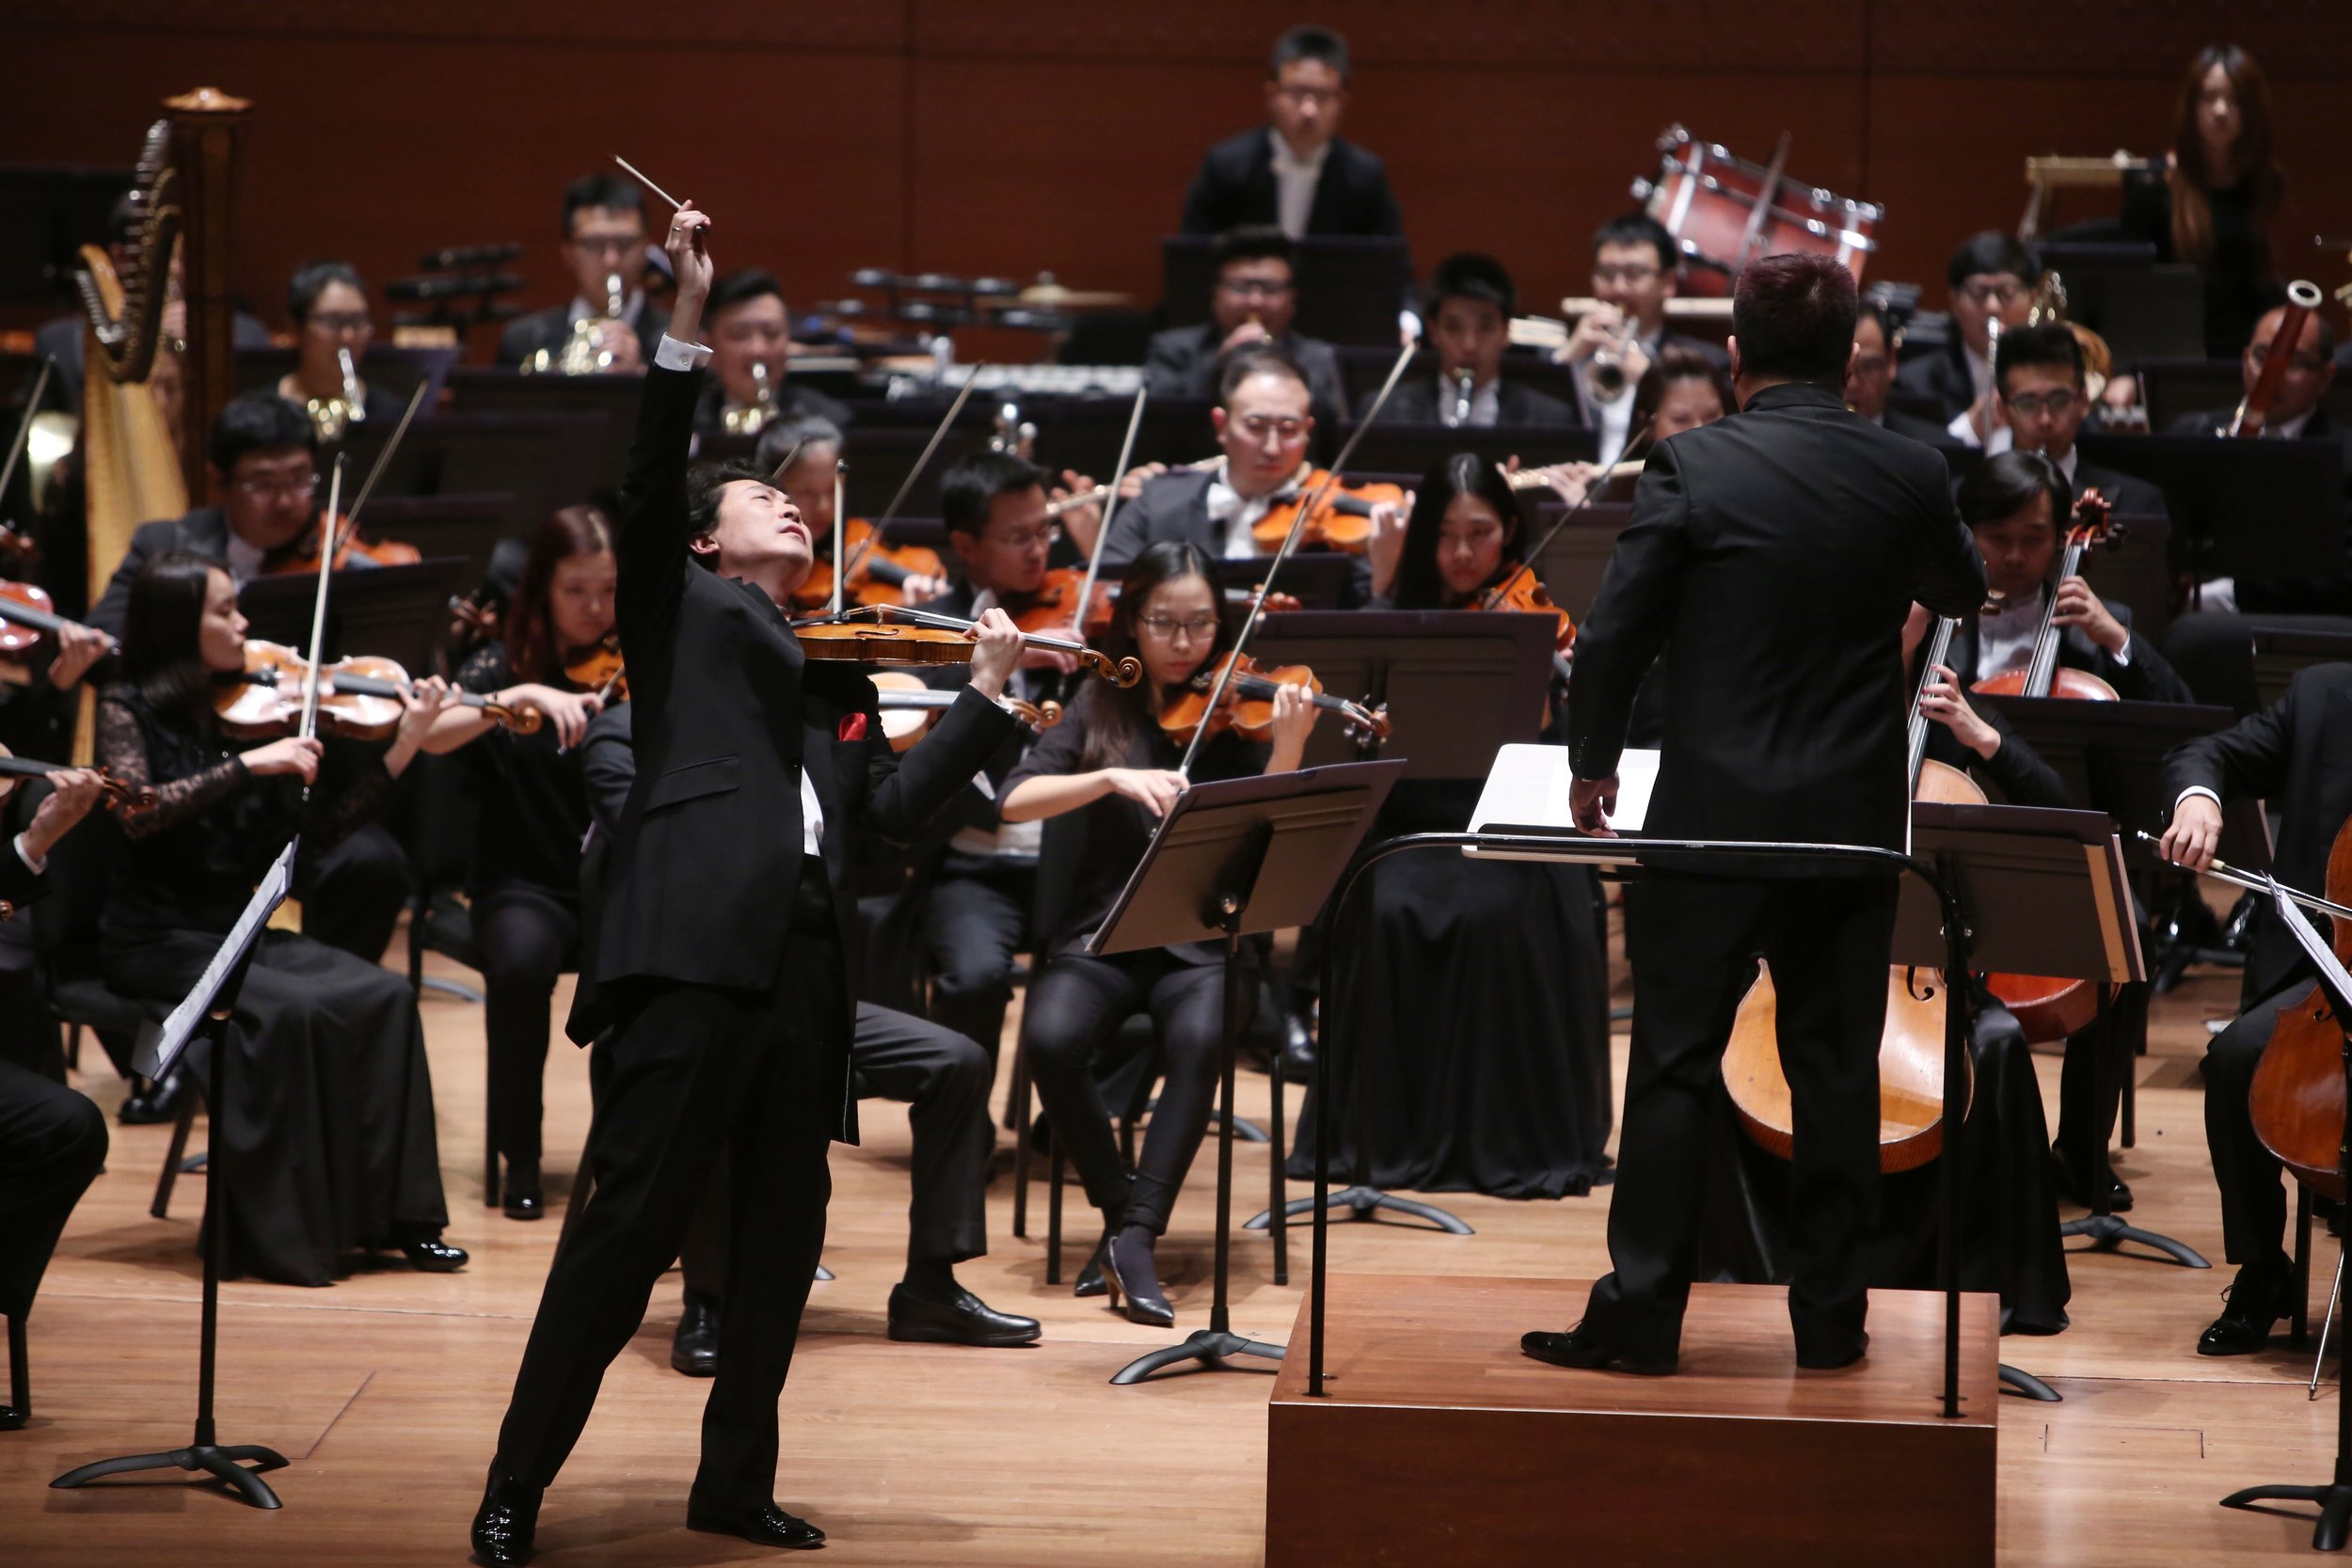 20141105_Alice Tully Hall,Lincoln Center_Concert in New York_摄影肖翊5.jpg